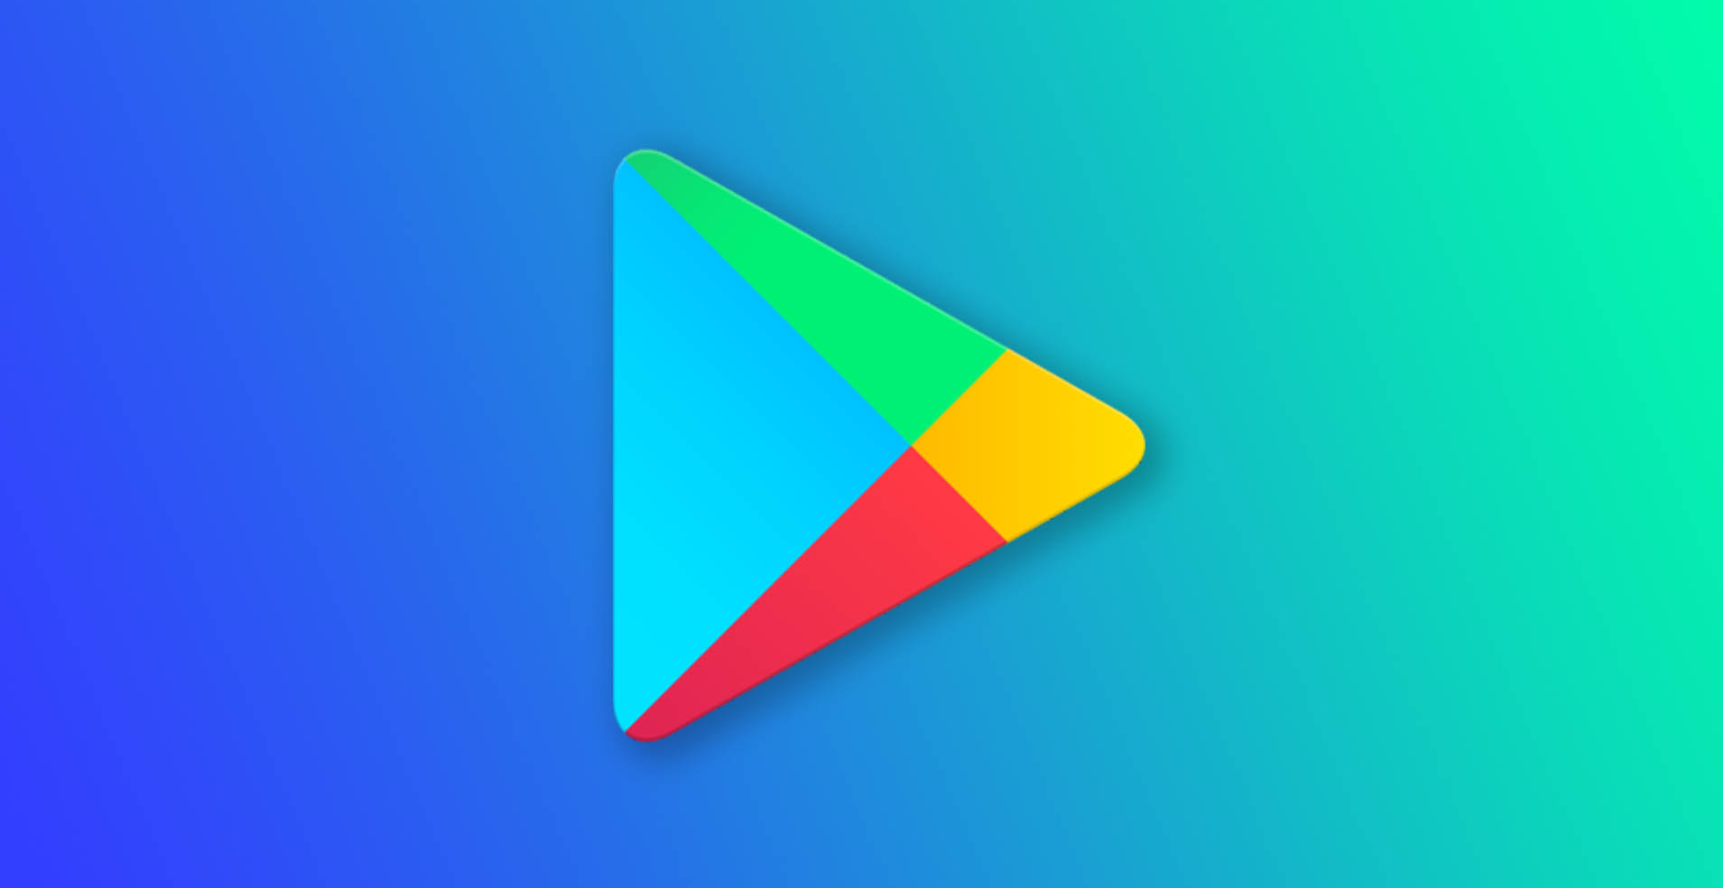 play store app download for free